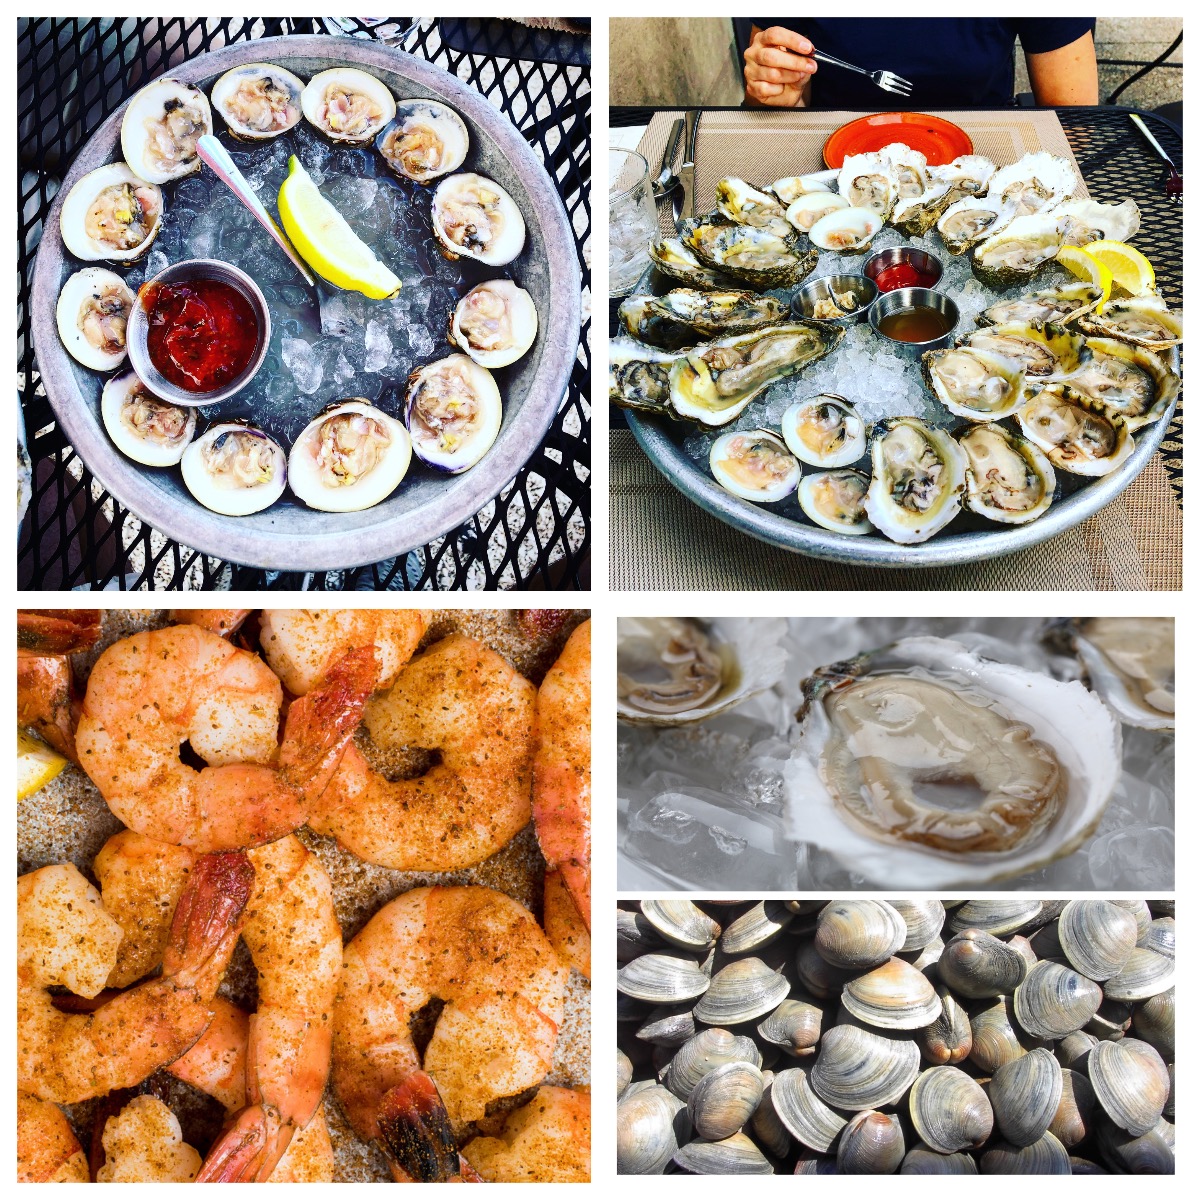 25 Fresh Maine Oysters For Sale Online - Oysters Shipped - Maine Oyster  Company